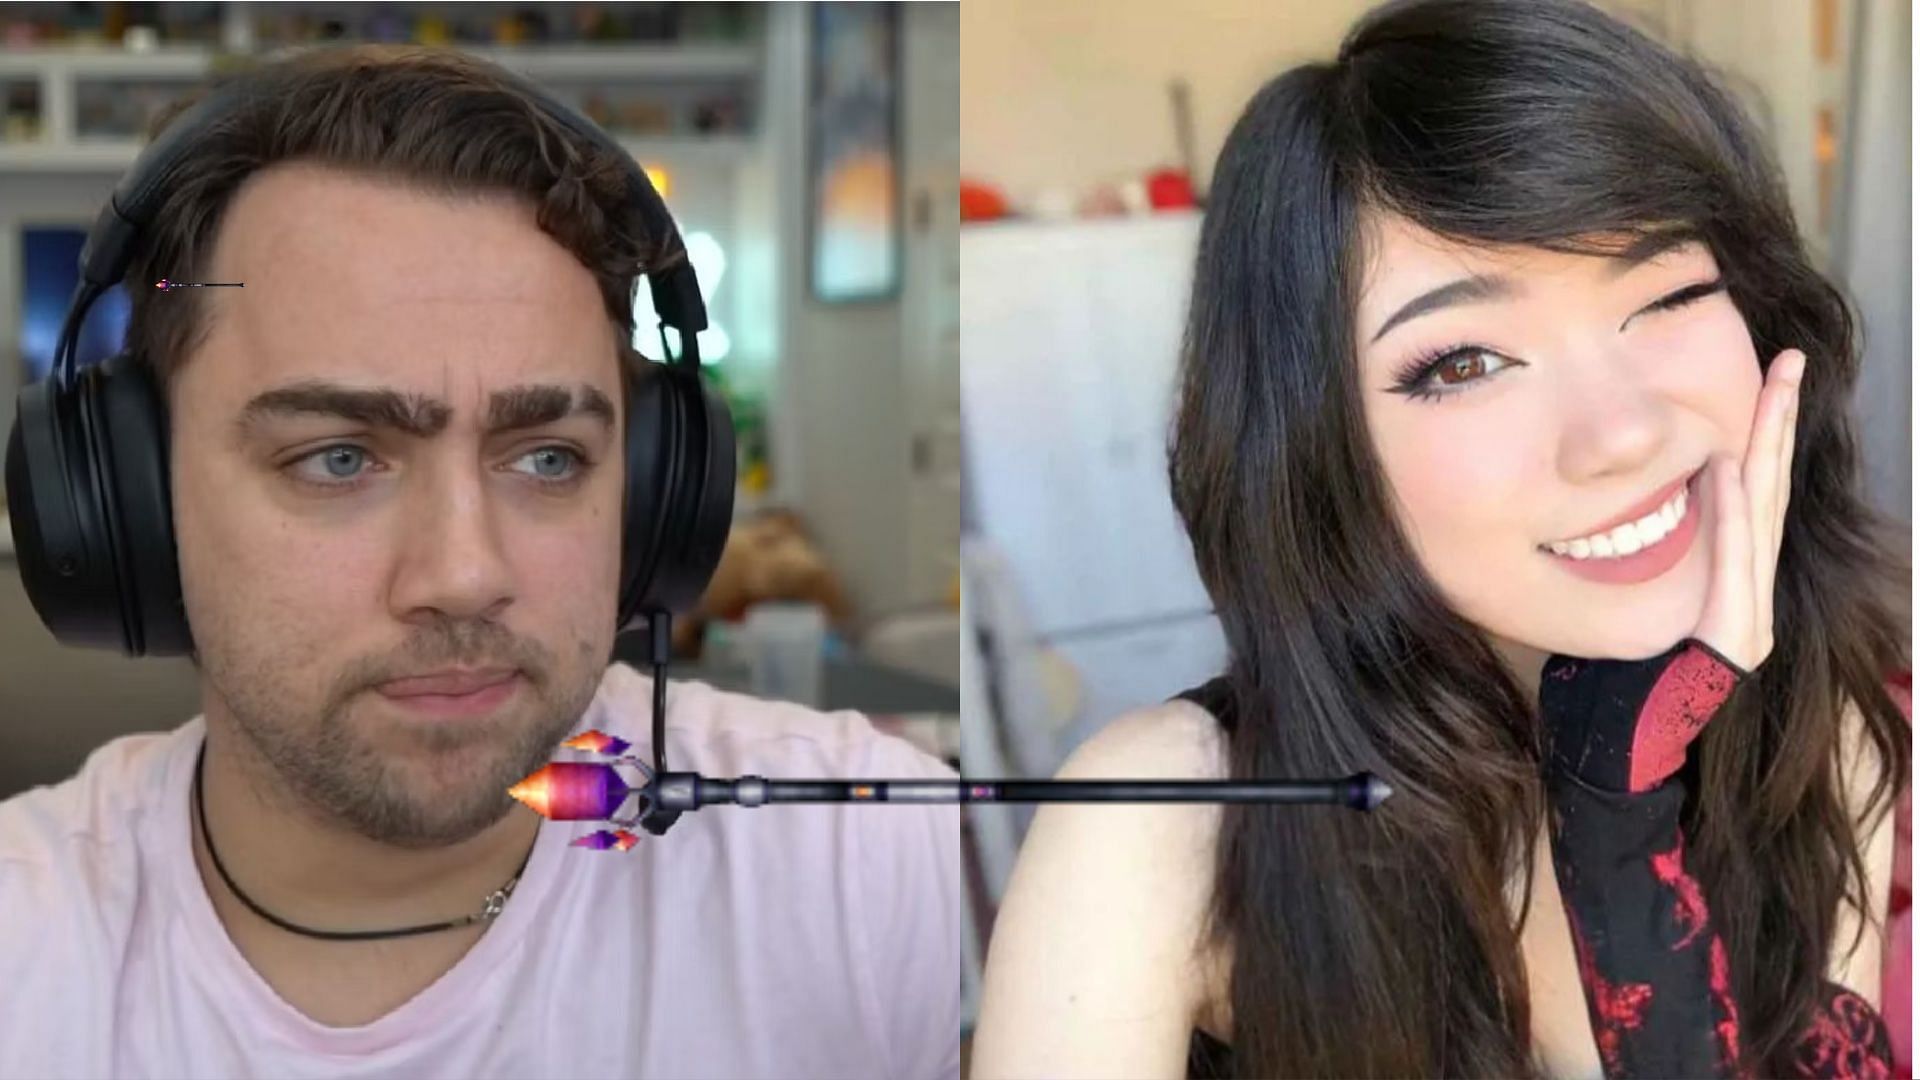 5 streamers with the most simps